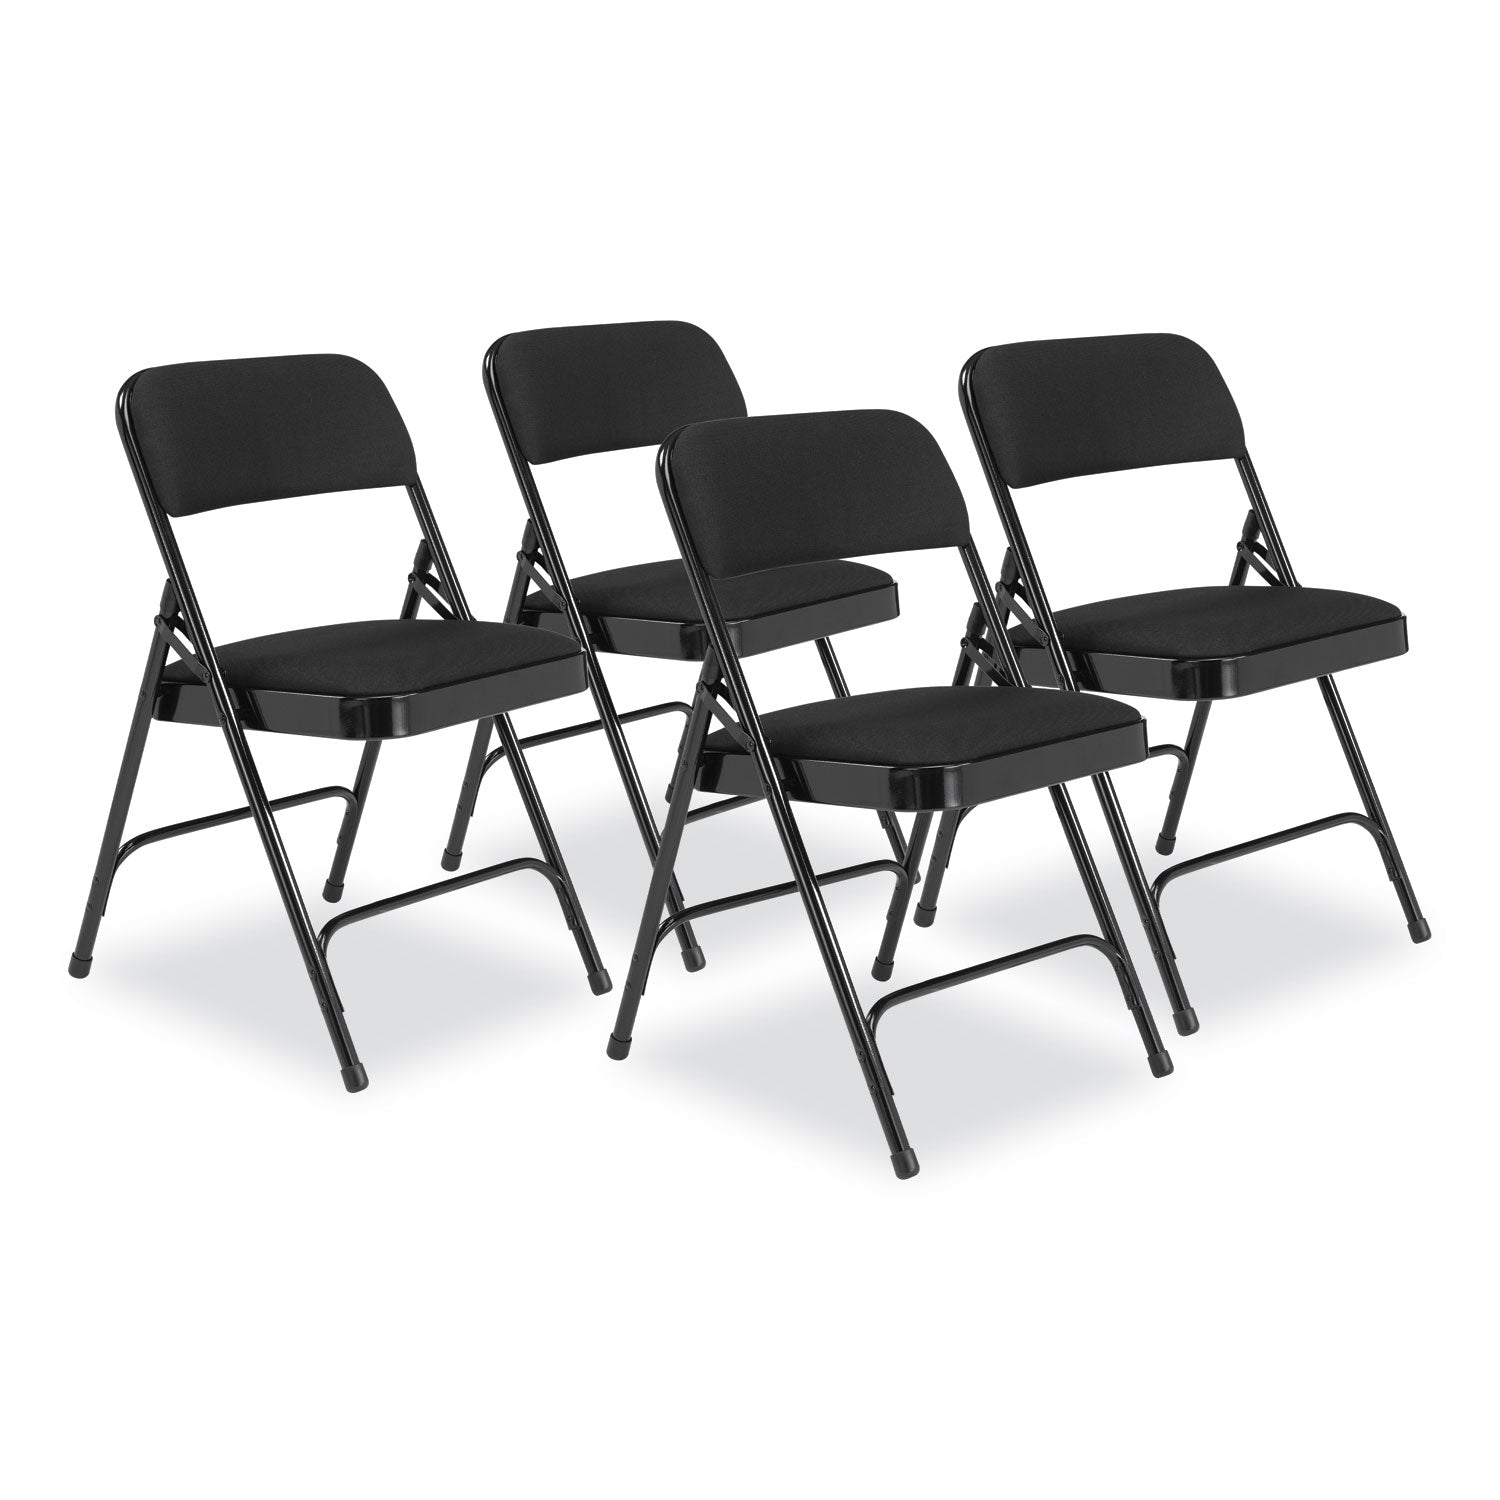 2200-series-fabric-dual-hinge-folding-chair-supports-500-lb-midnight-black-seat-back-black-base4-ctships-in-1-3-bus-days_nps2210 - 1